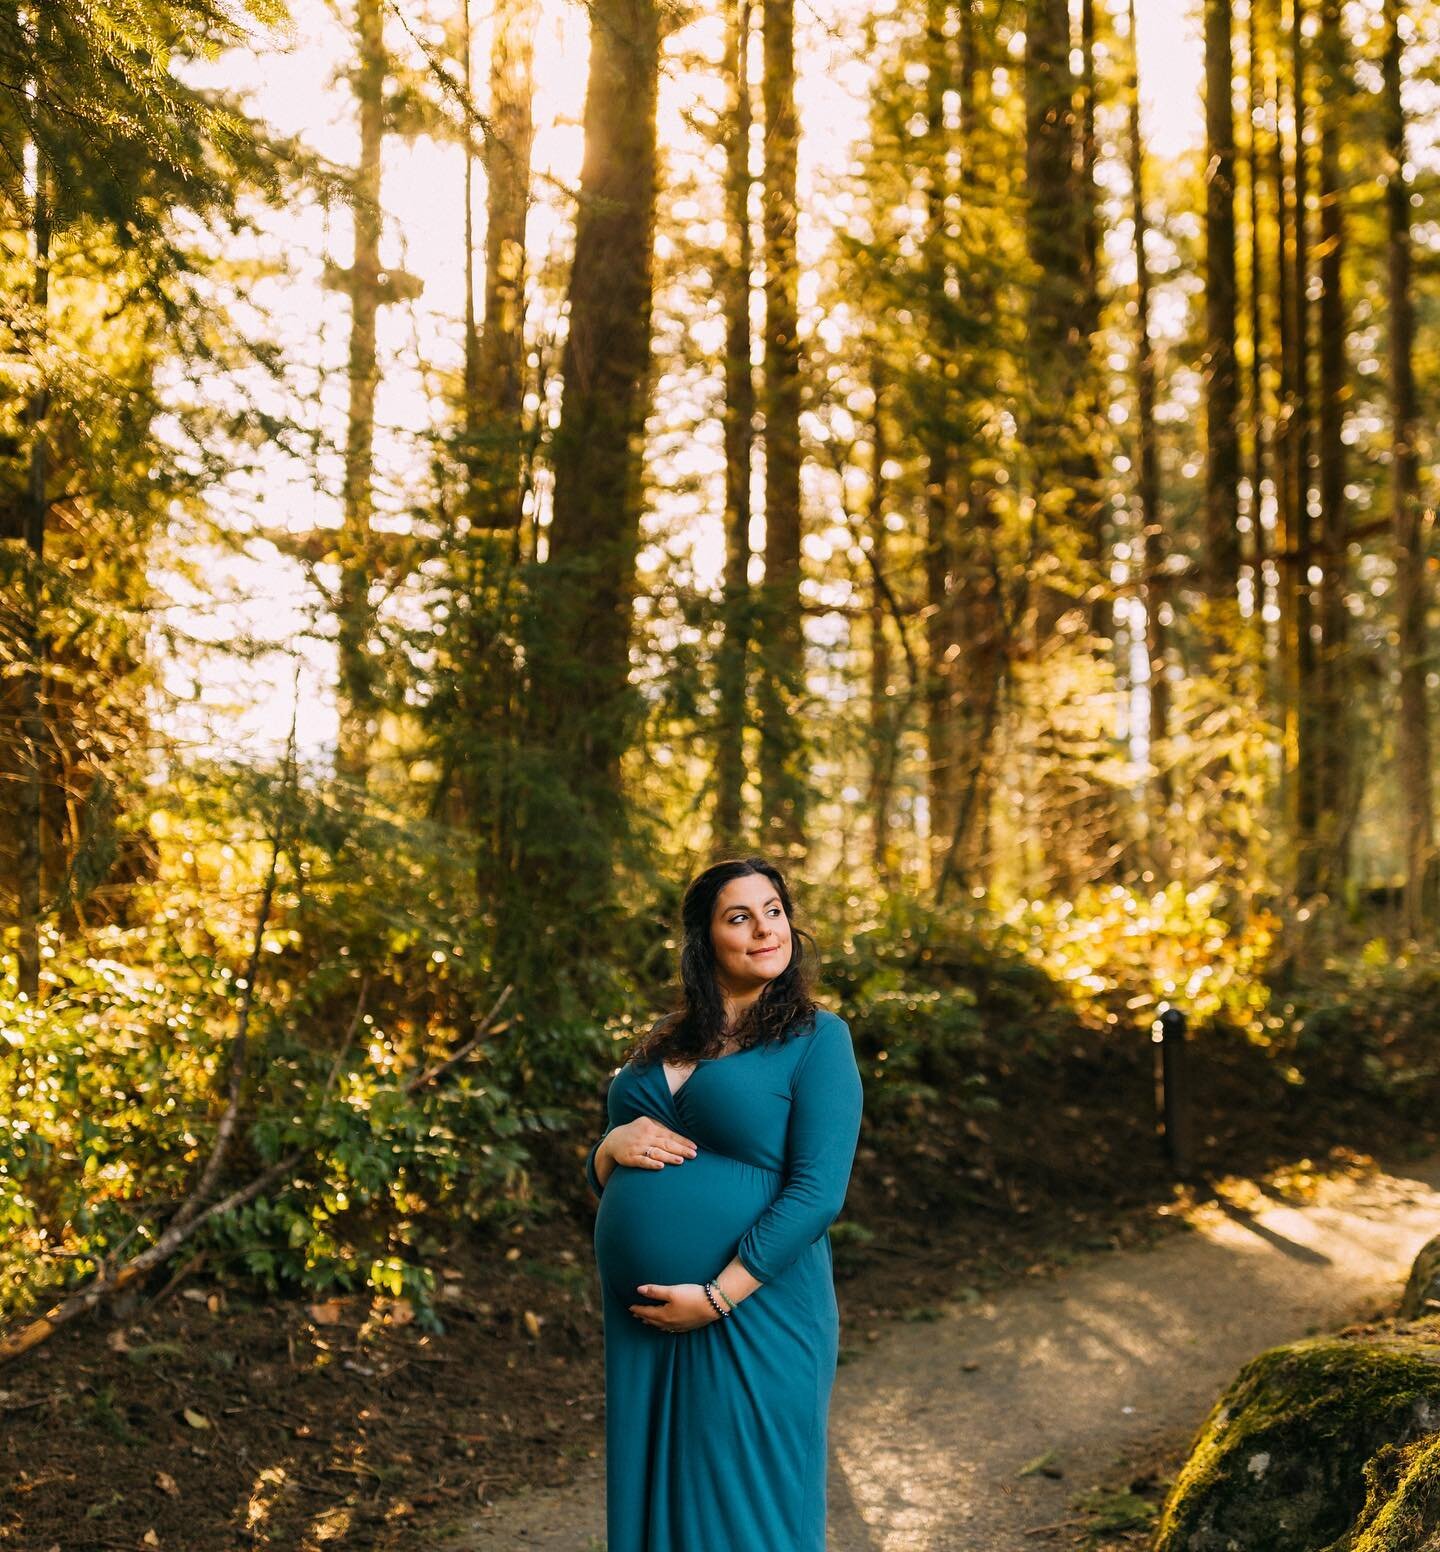 Beautiful mama to be @emiliamav123 thank you so much for trusting me to capture these beautiful images for you and Mark 🥹🥰